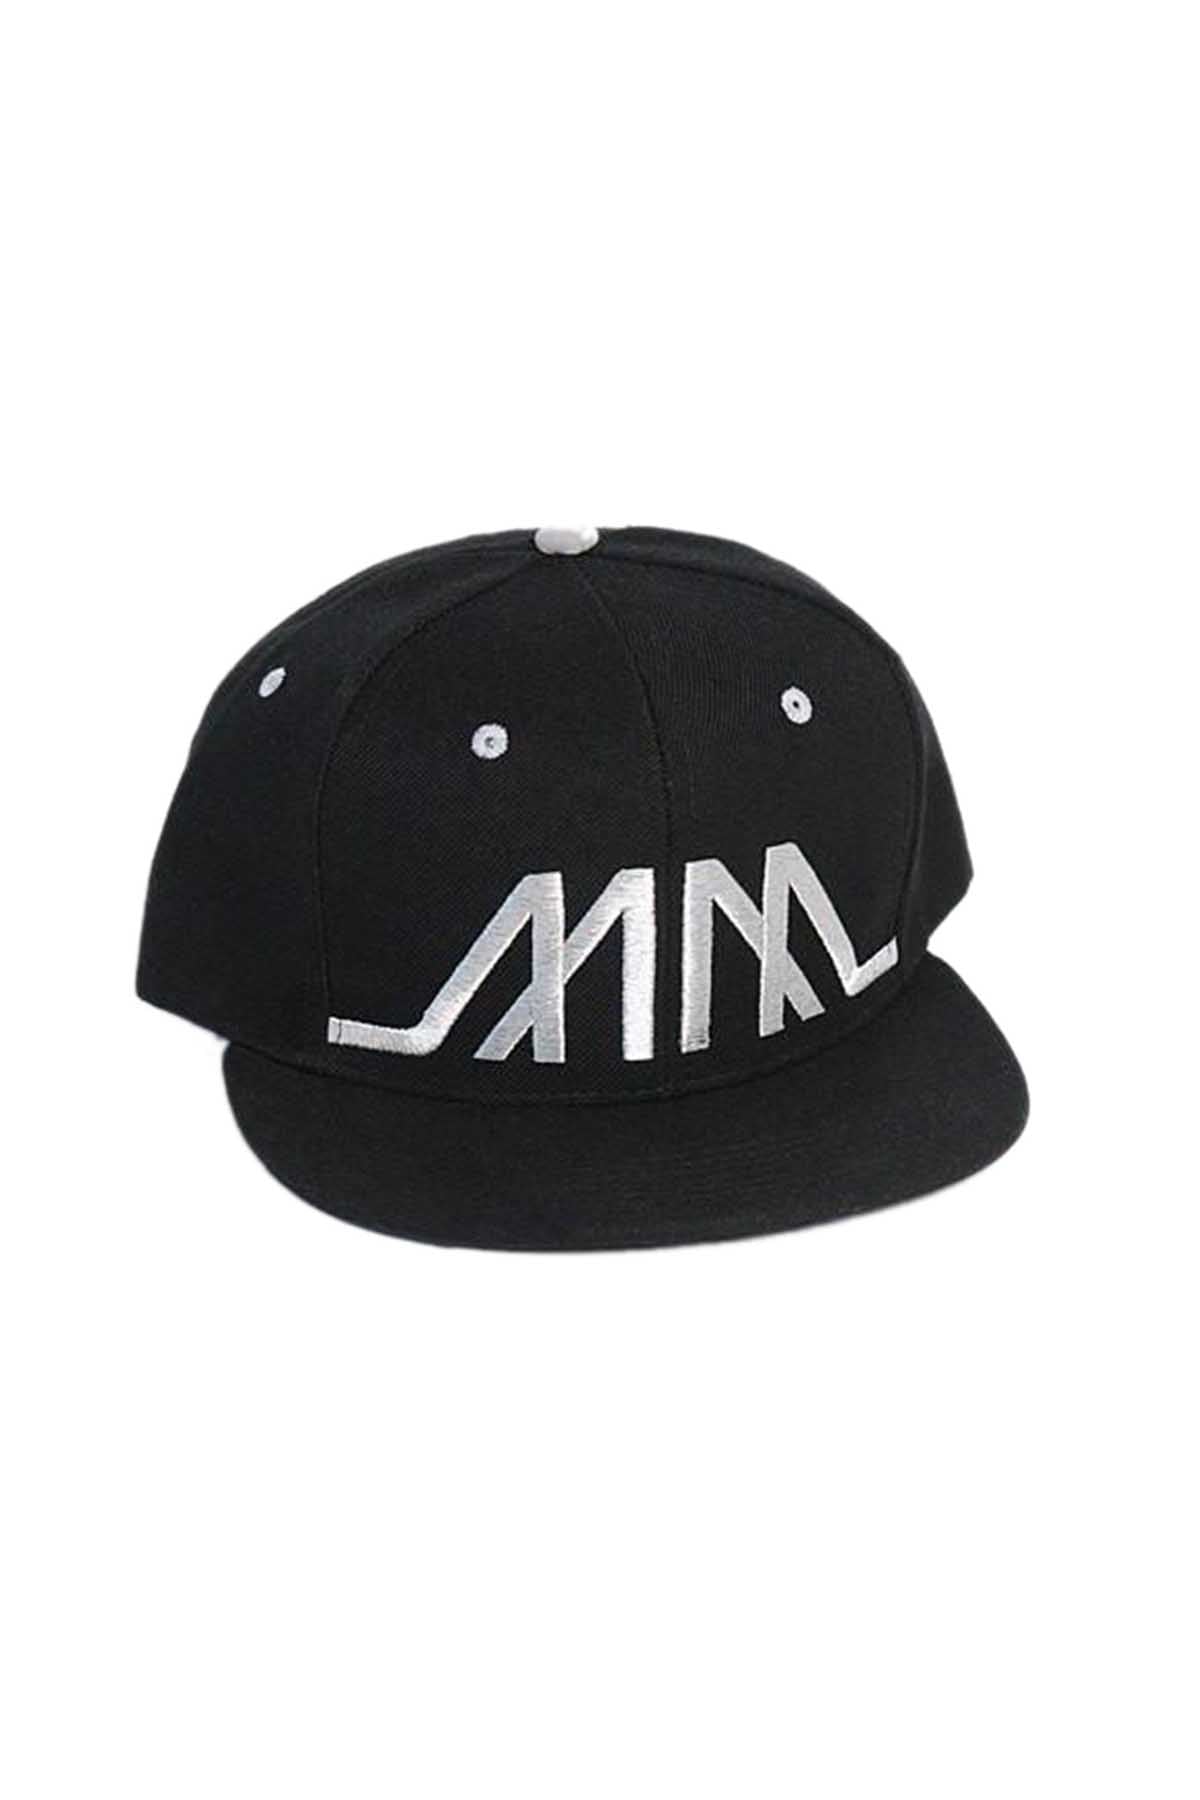 Marco Marco Silver Embroidered MM Snapback